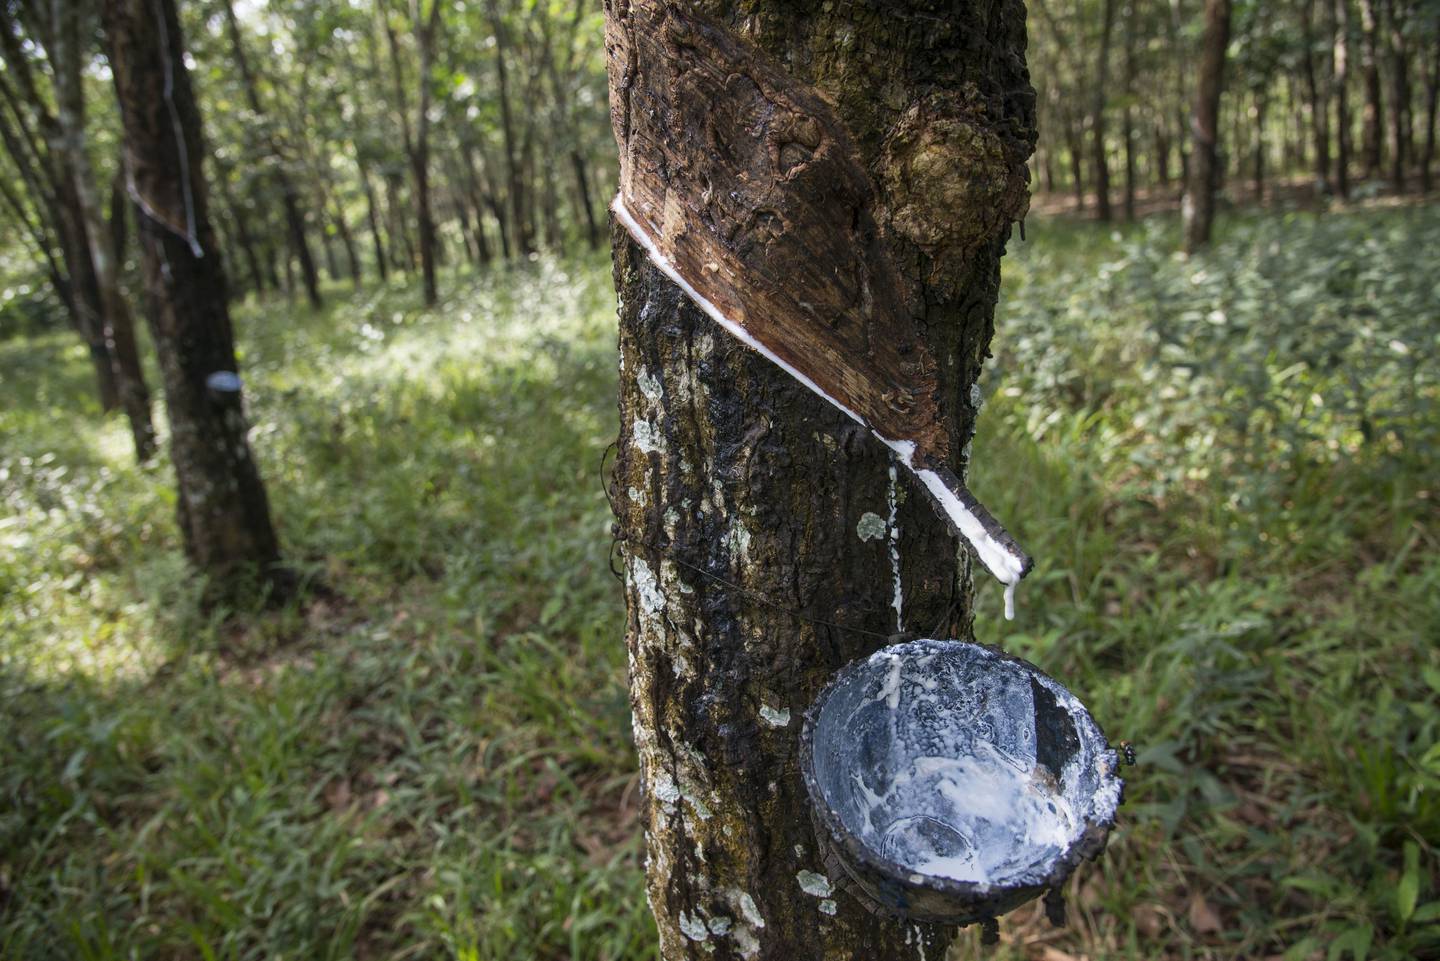 Latex from a rubber tree collects in a cup at a rubber plantation in Sembawa, South Sumatra, Indonesia, in 2015.